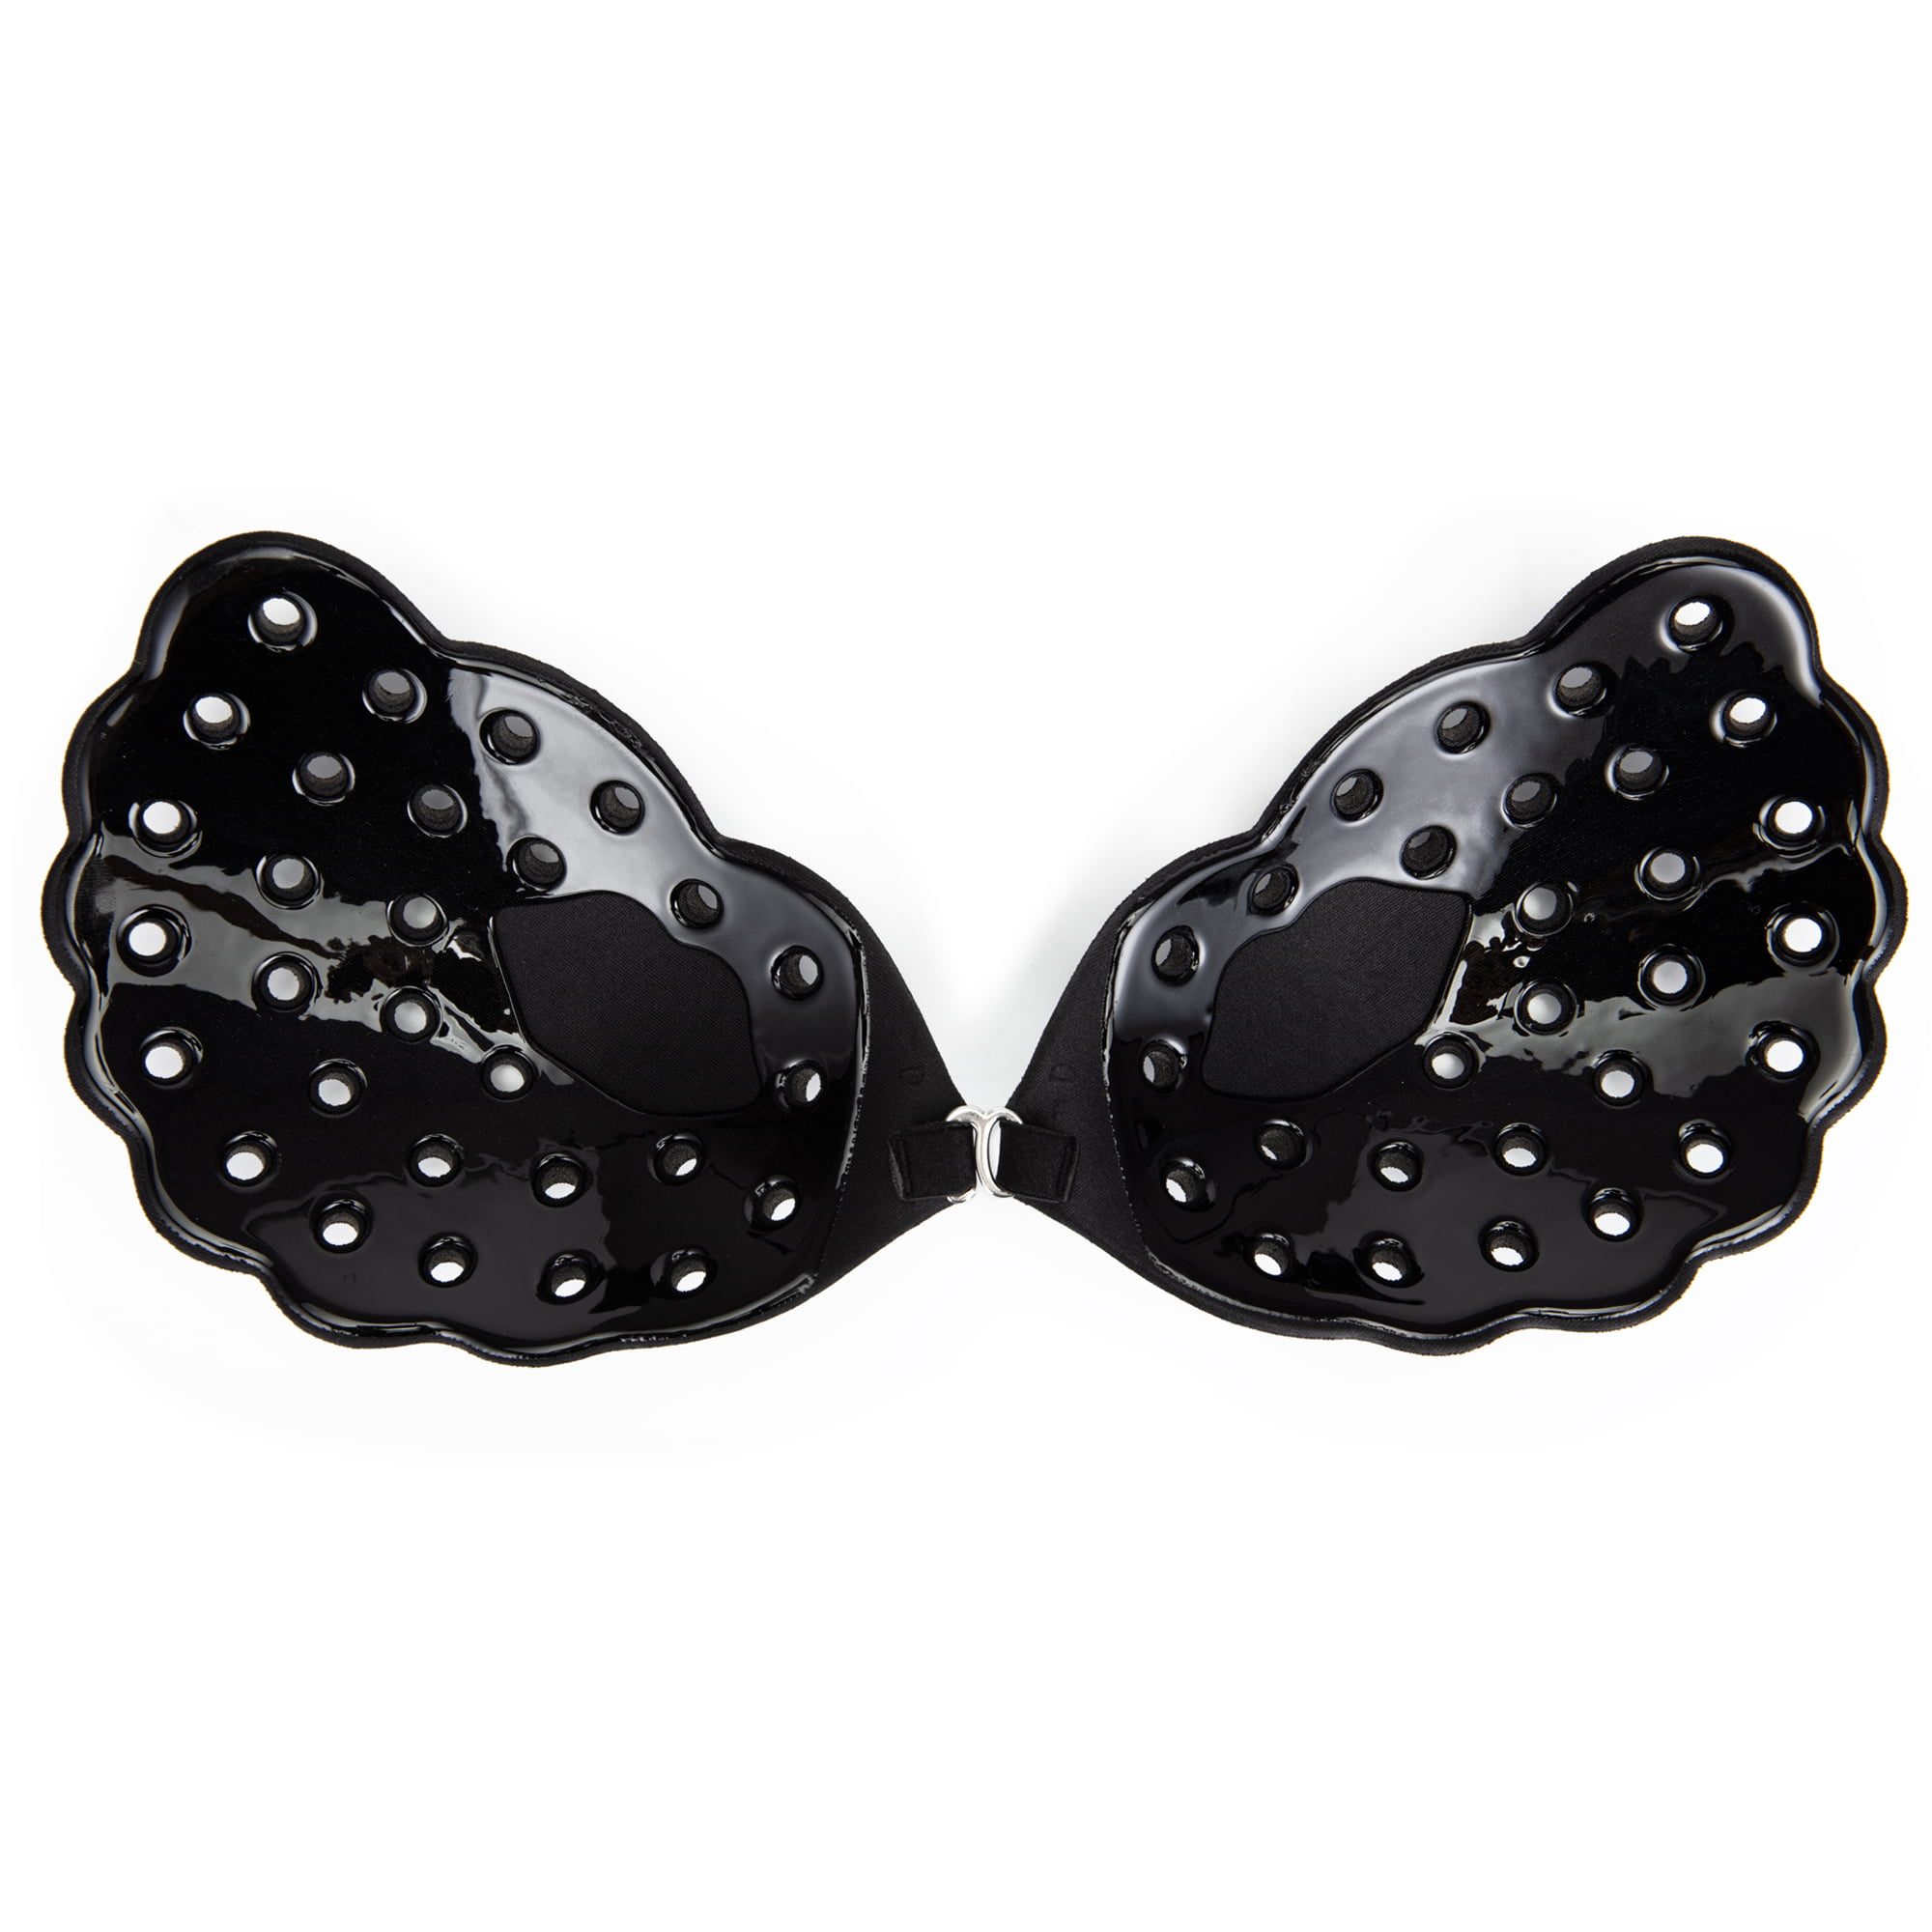 3017 Black Push-up Breast Stickers With Eight Holes, 1 Pair